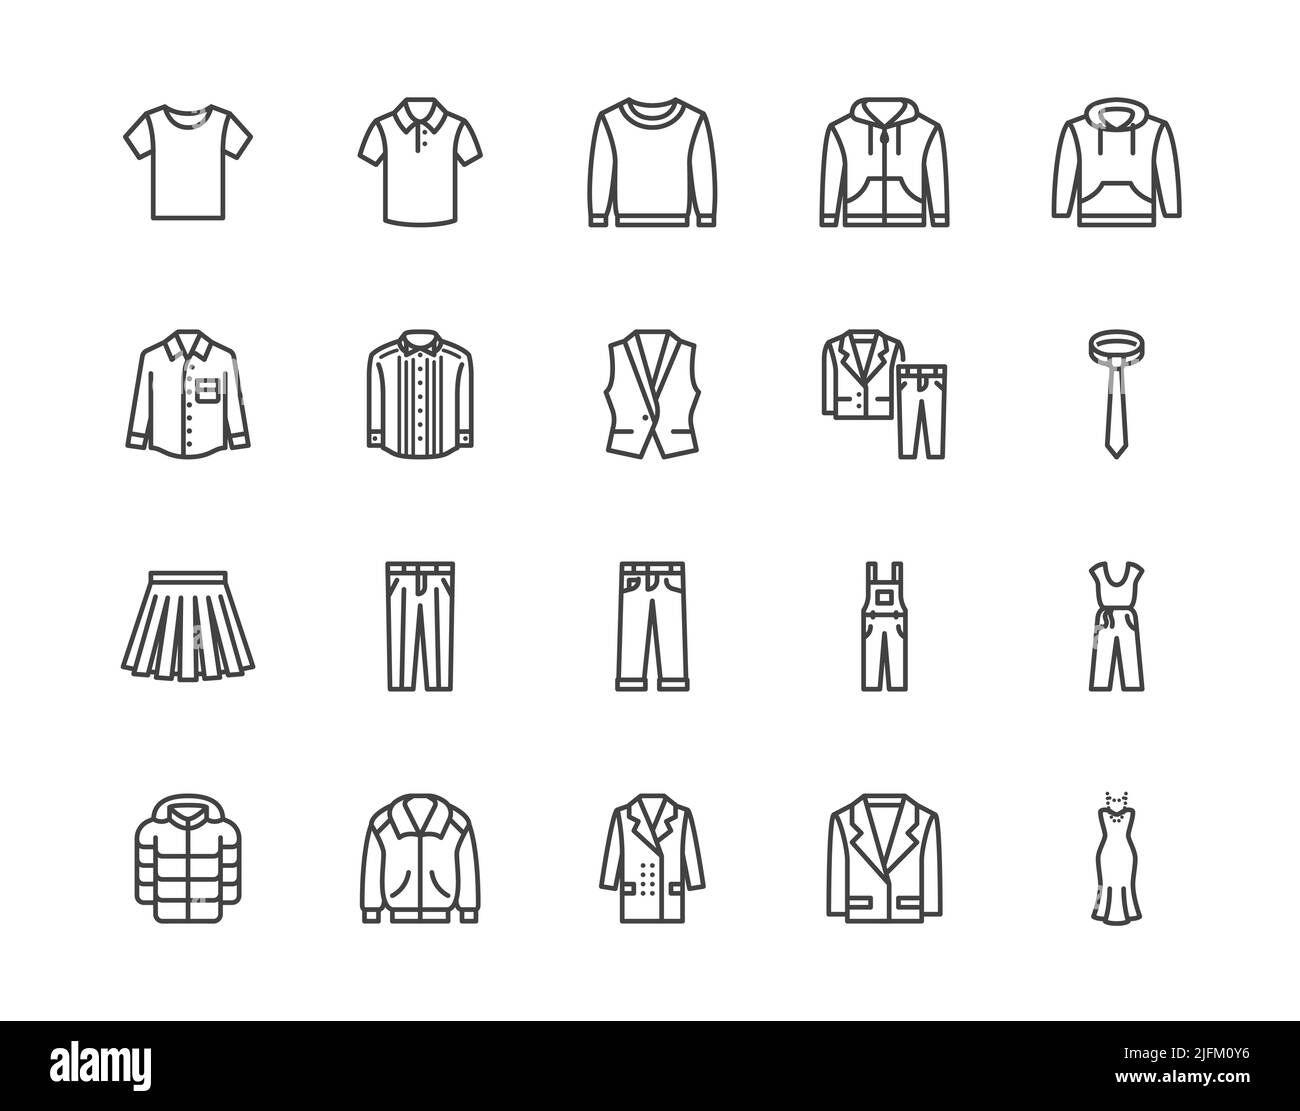 Cloth flat line icons set. Apparel - jacket, hoody, sweatshirt, male pants, polo shirt, jeans, coat, tie vector illustrations. Outline signs for Stock Vector